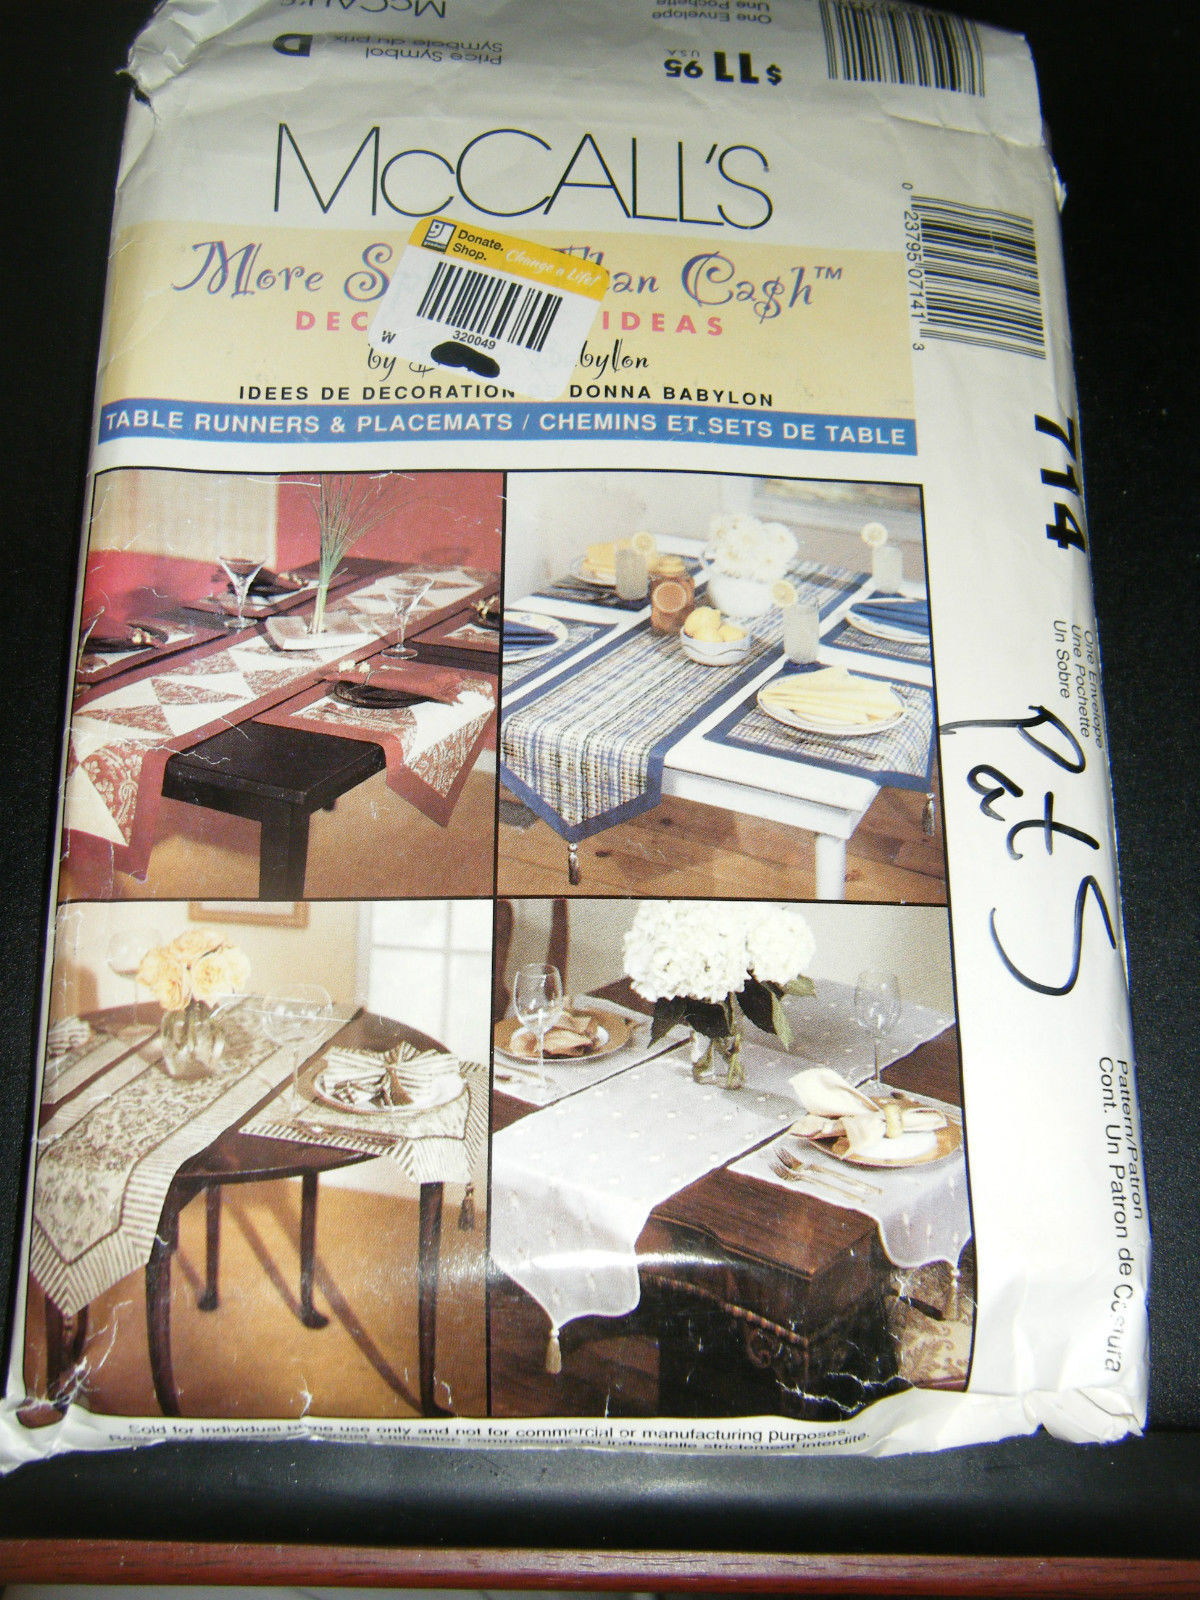 Primary image for McCall's by Donna Babylon 714 Tablerunners & Placemats Pattern